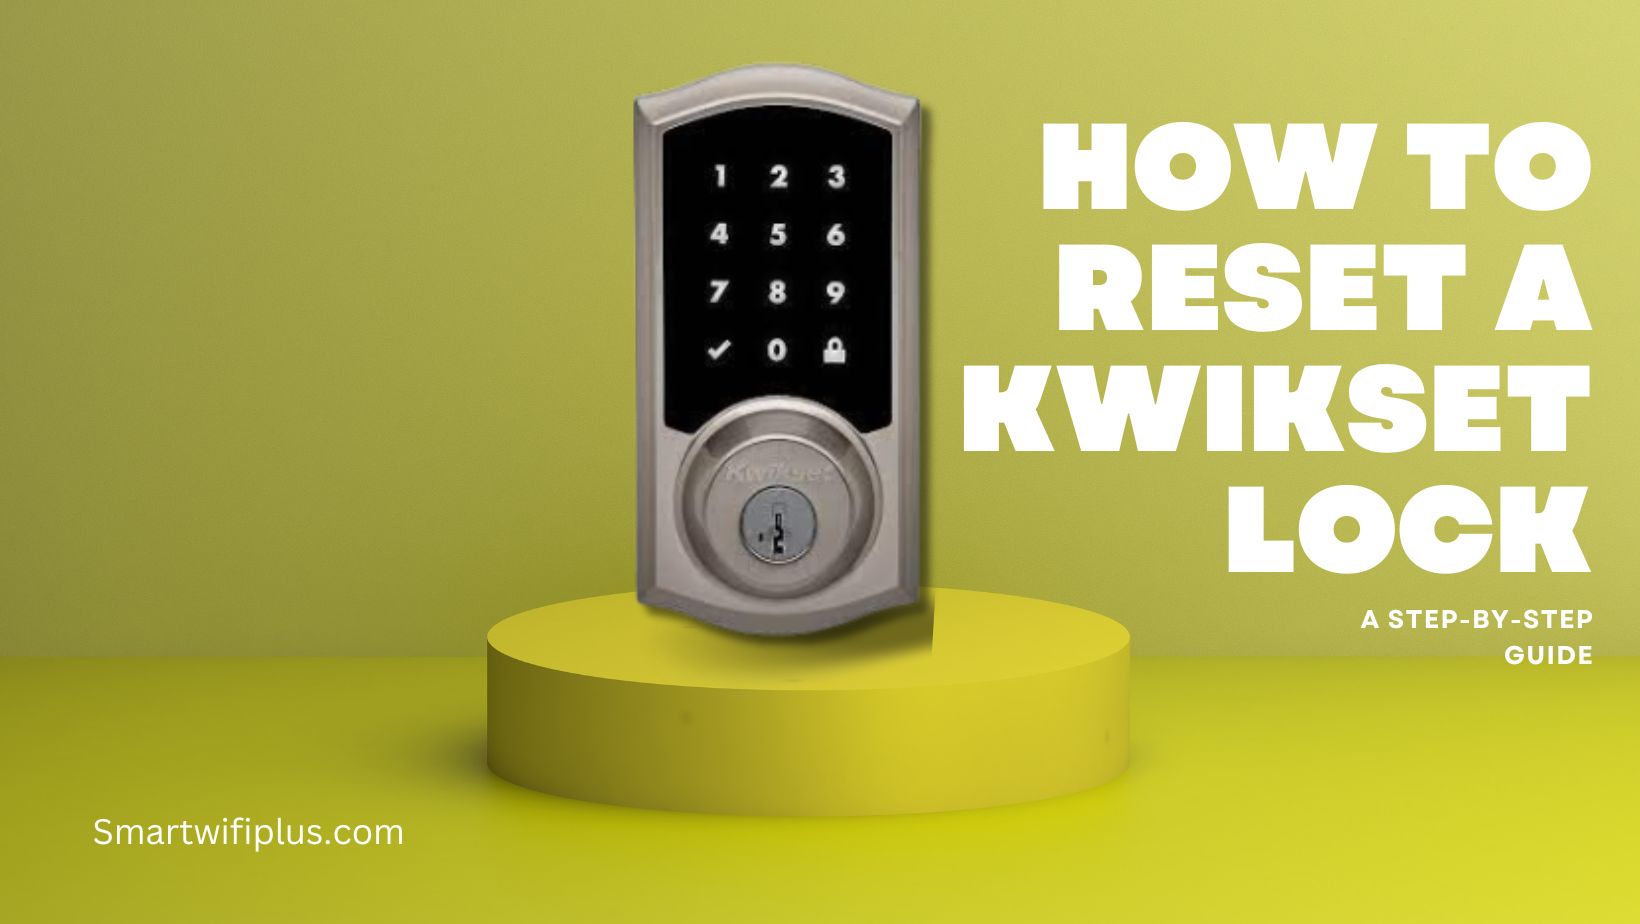 How to Reset a Kwikset Lock: A Step-by-Step Guide